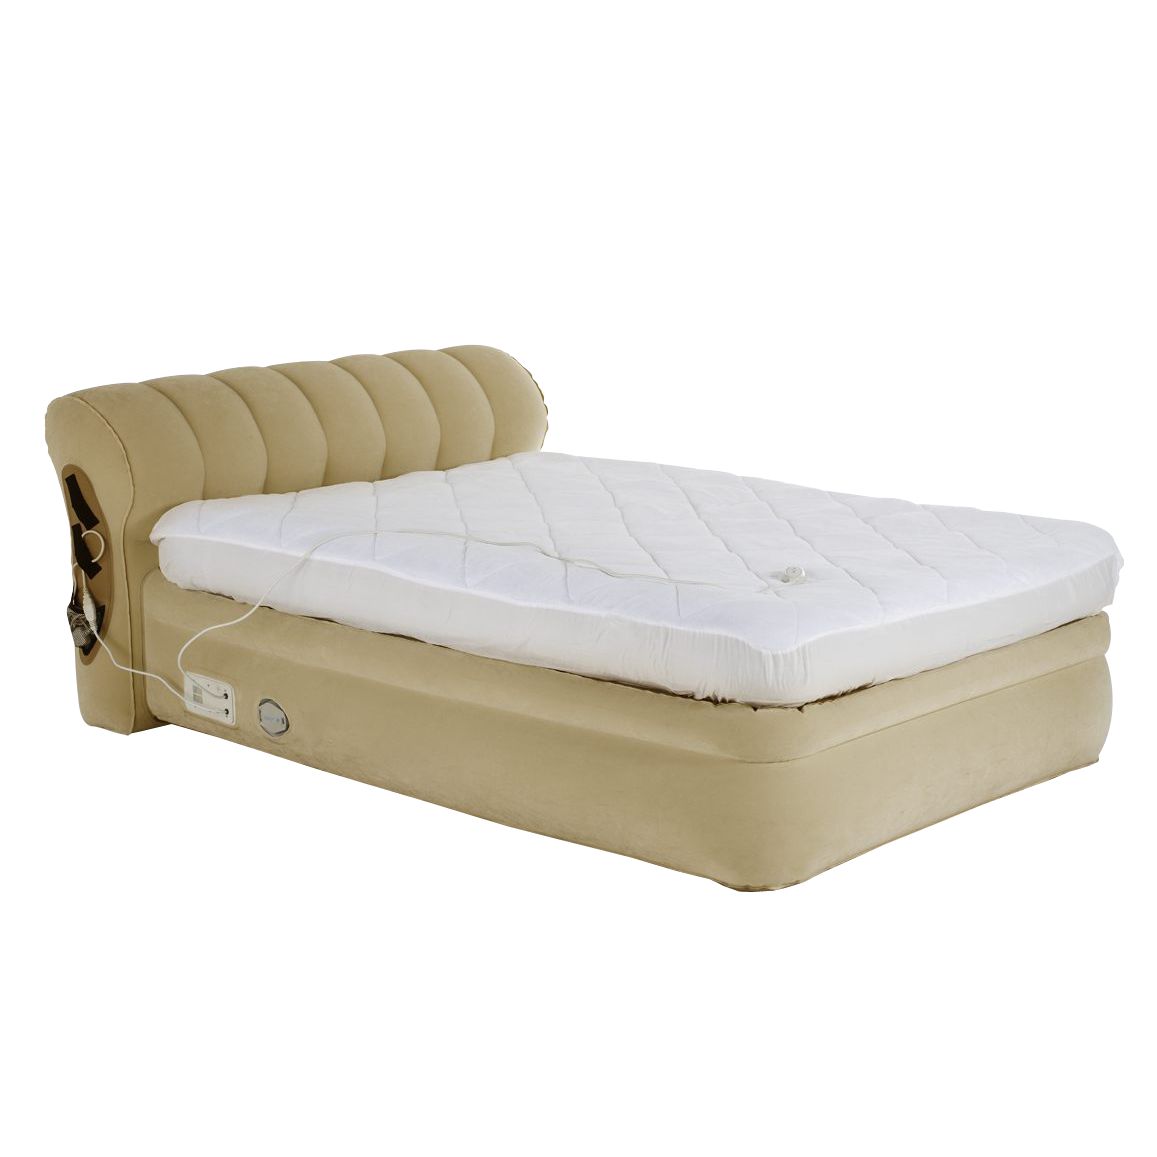 AeroBed Platinum Raised Inflatable Guest Bed